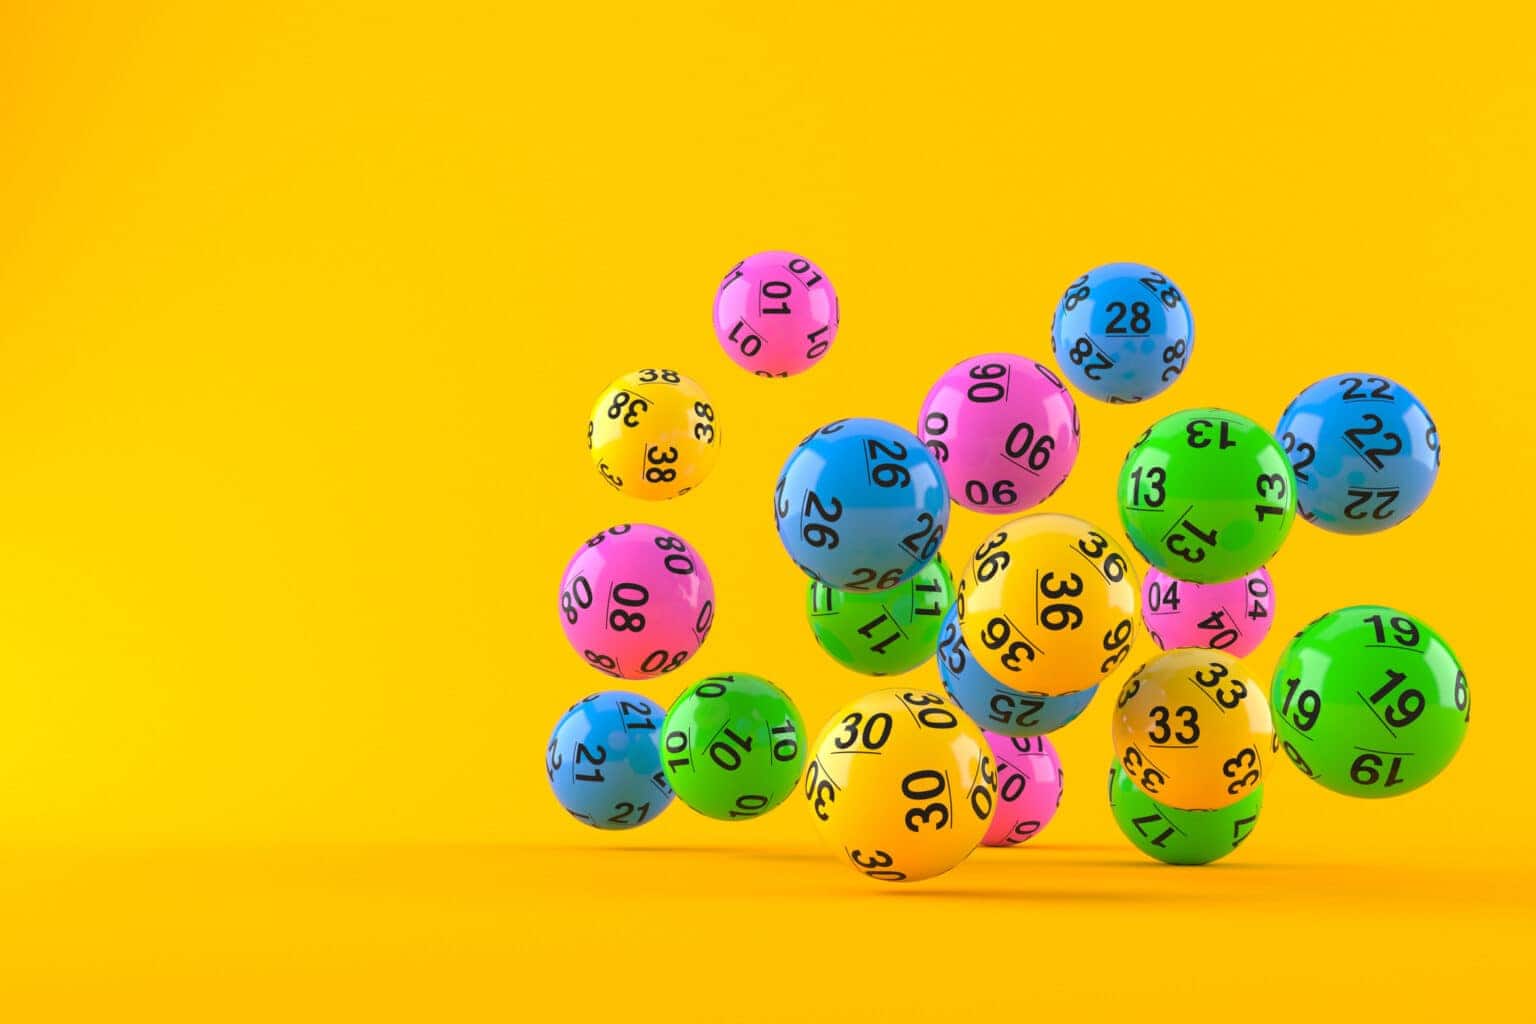 Lotto and Lotto Plus results 21 October